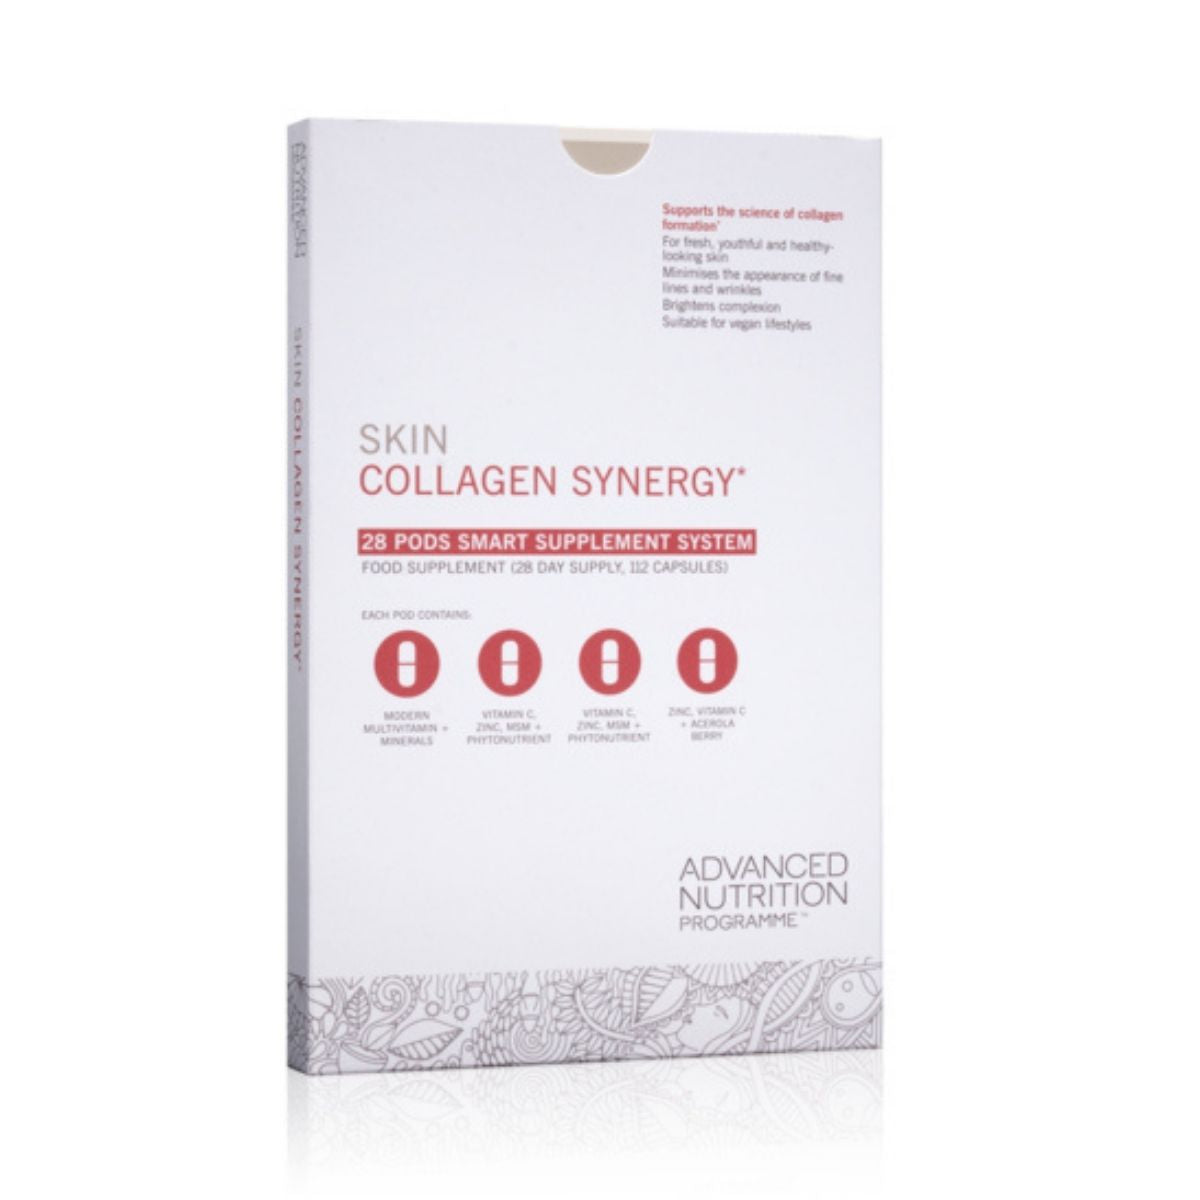 Advanced Nutrition Programme Skin Collagen Synergy